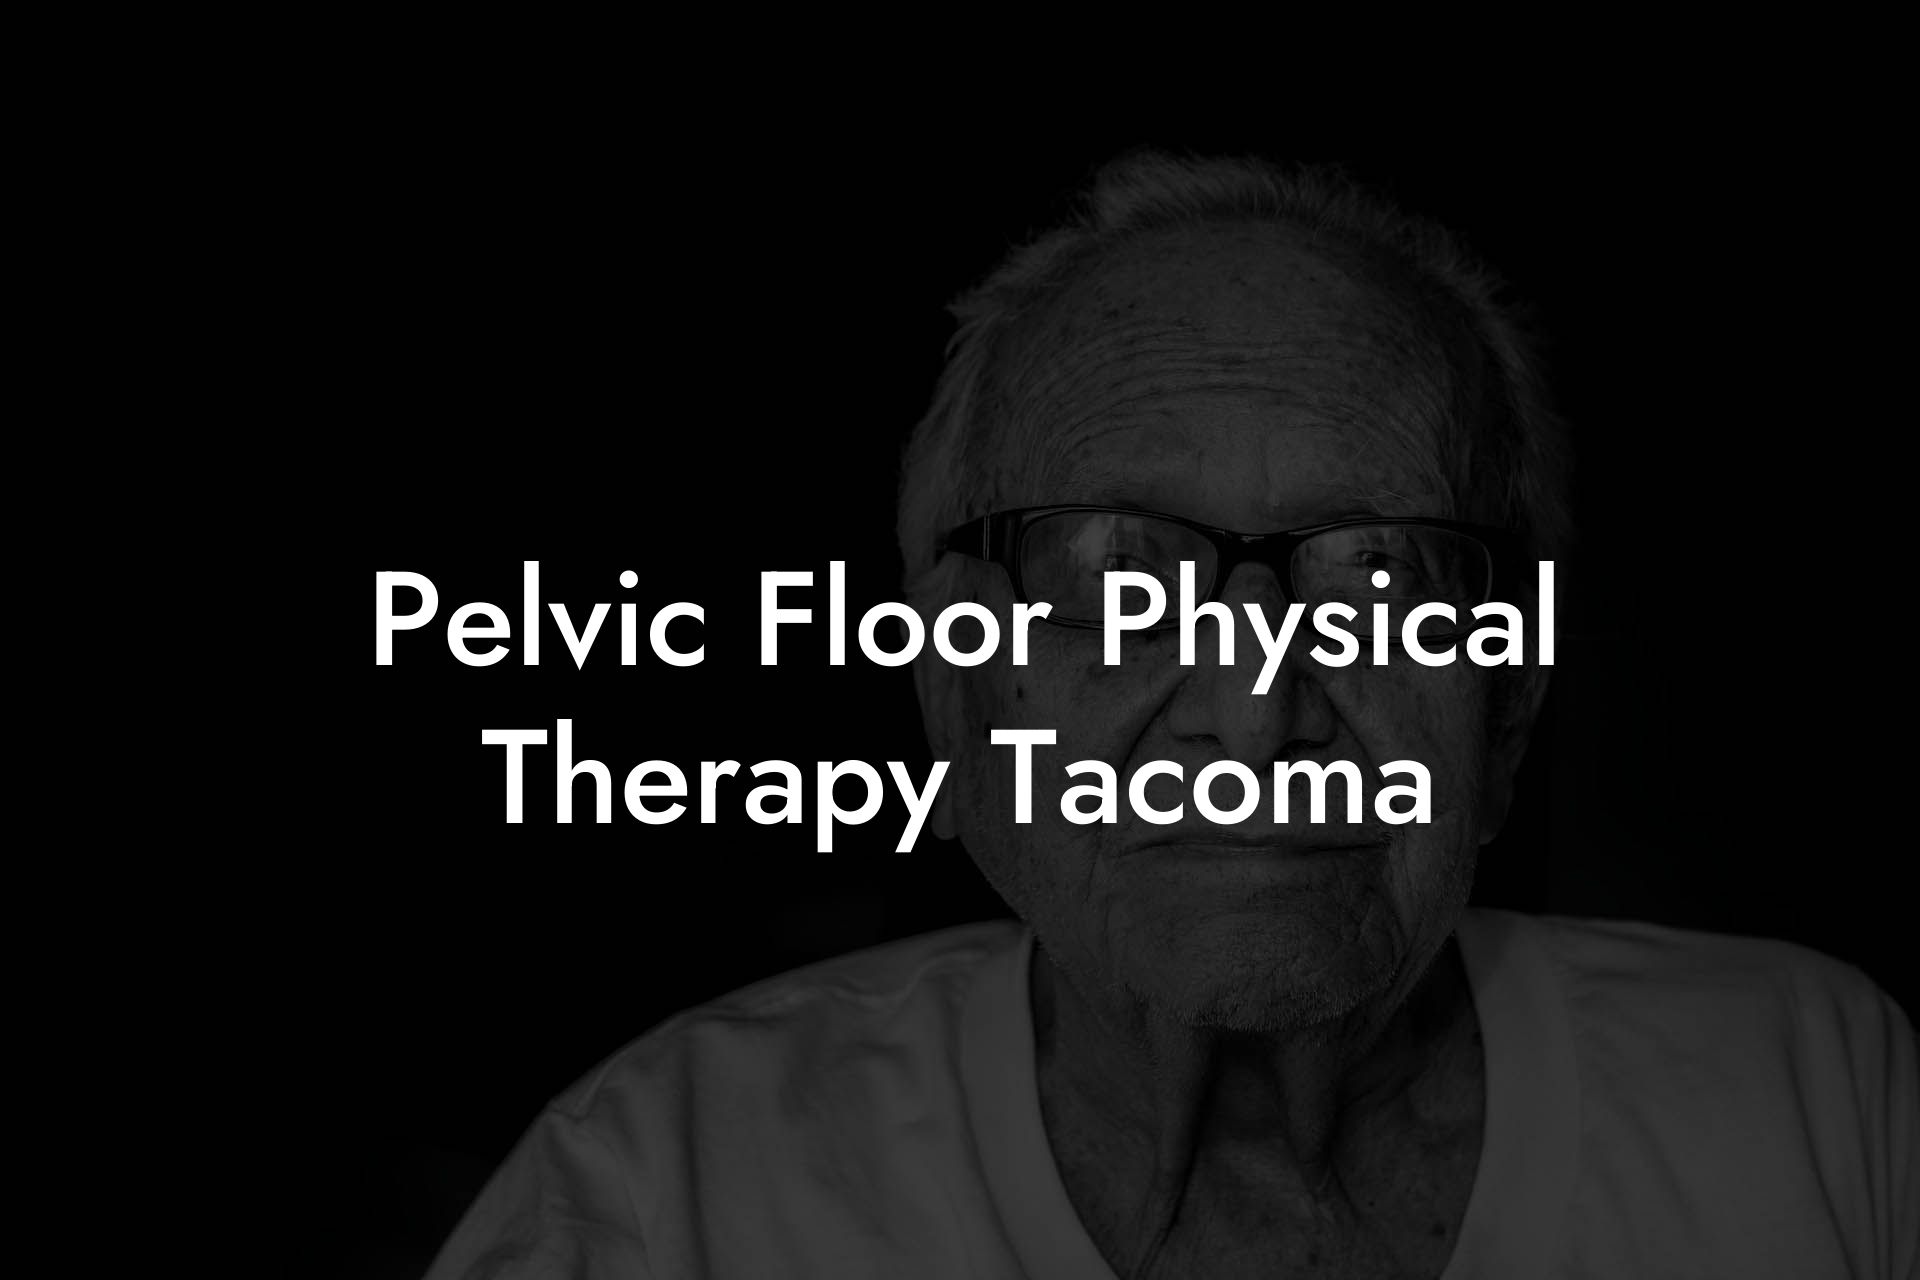 Pelvic Floor Physical Therapy Tacoma